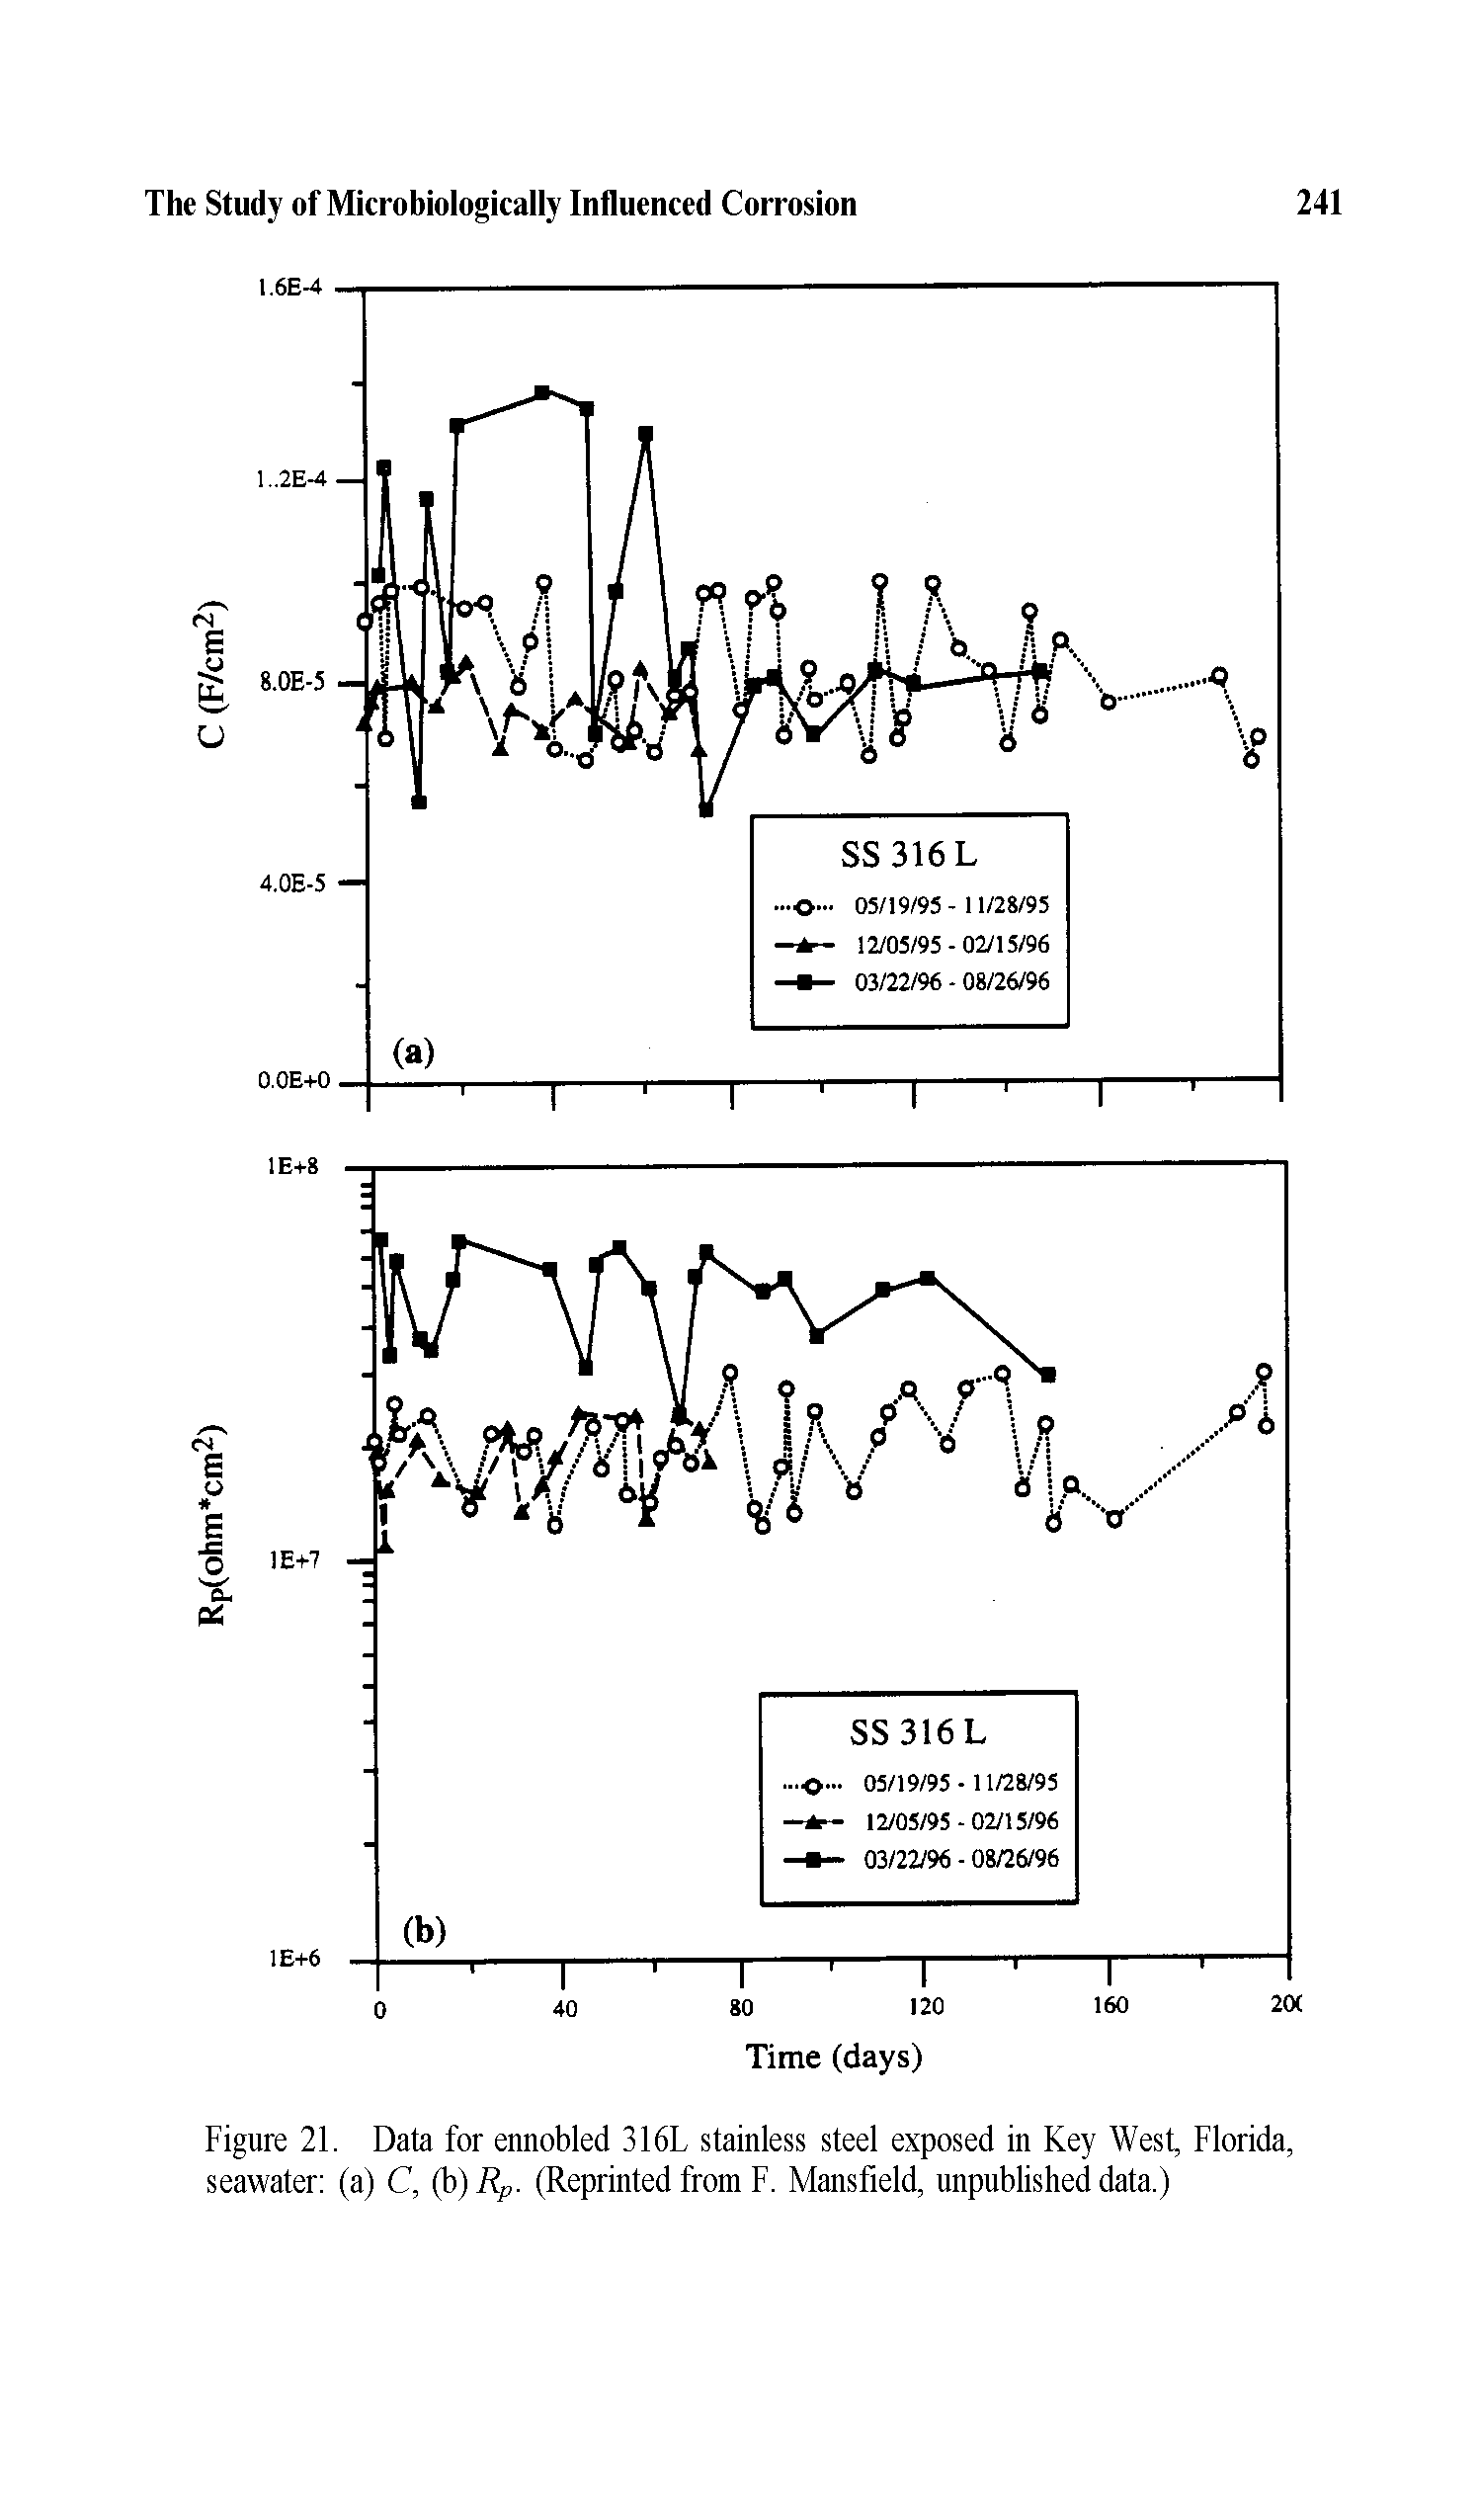 Figure 21. Data for ennobled 316L stainless steel exposed in Key West, Florida, seawater (a) C, (h)Rp. (Reprinted from F. Mansfield, unpublished data.)...